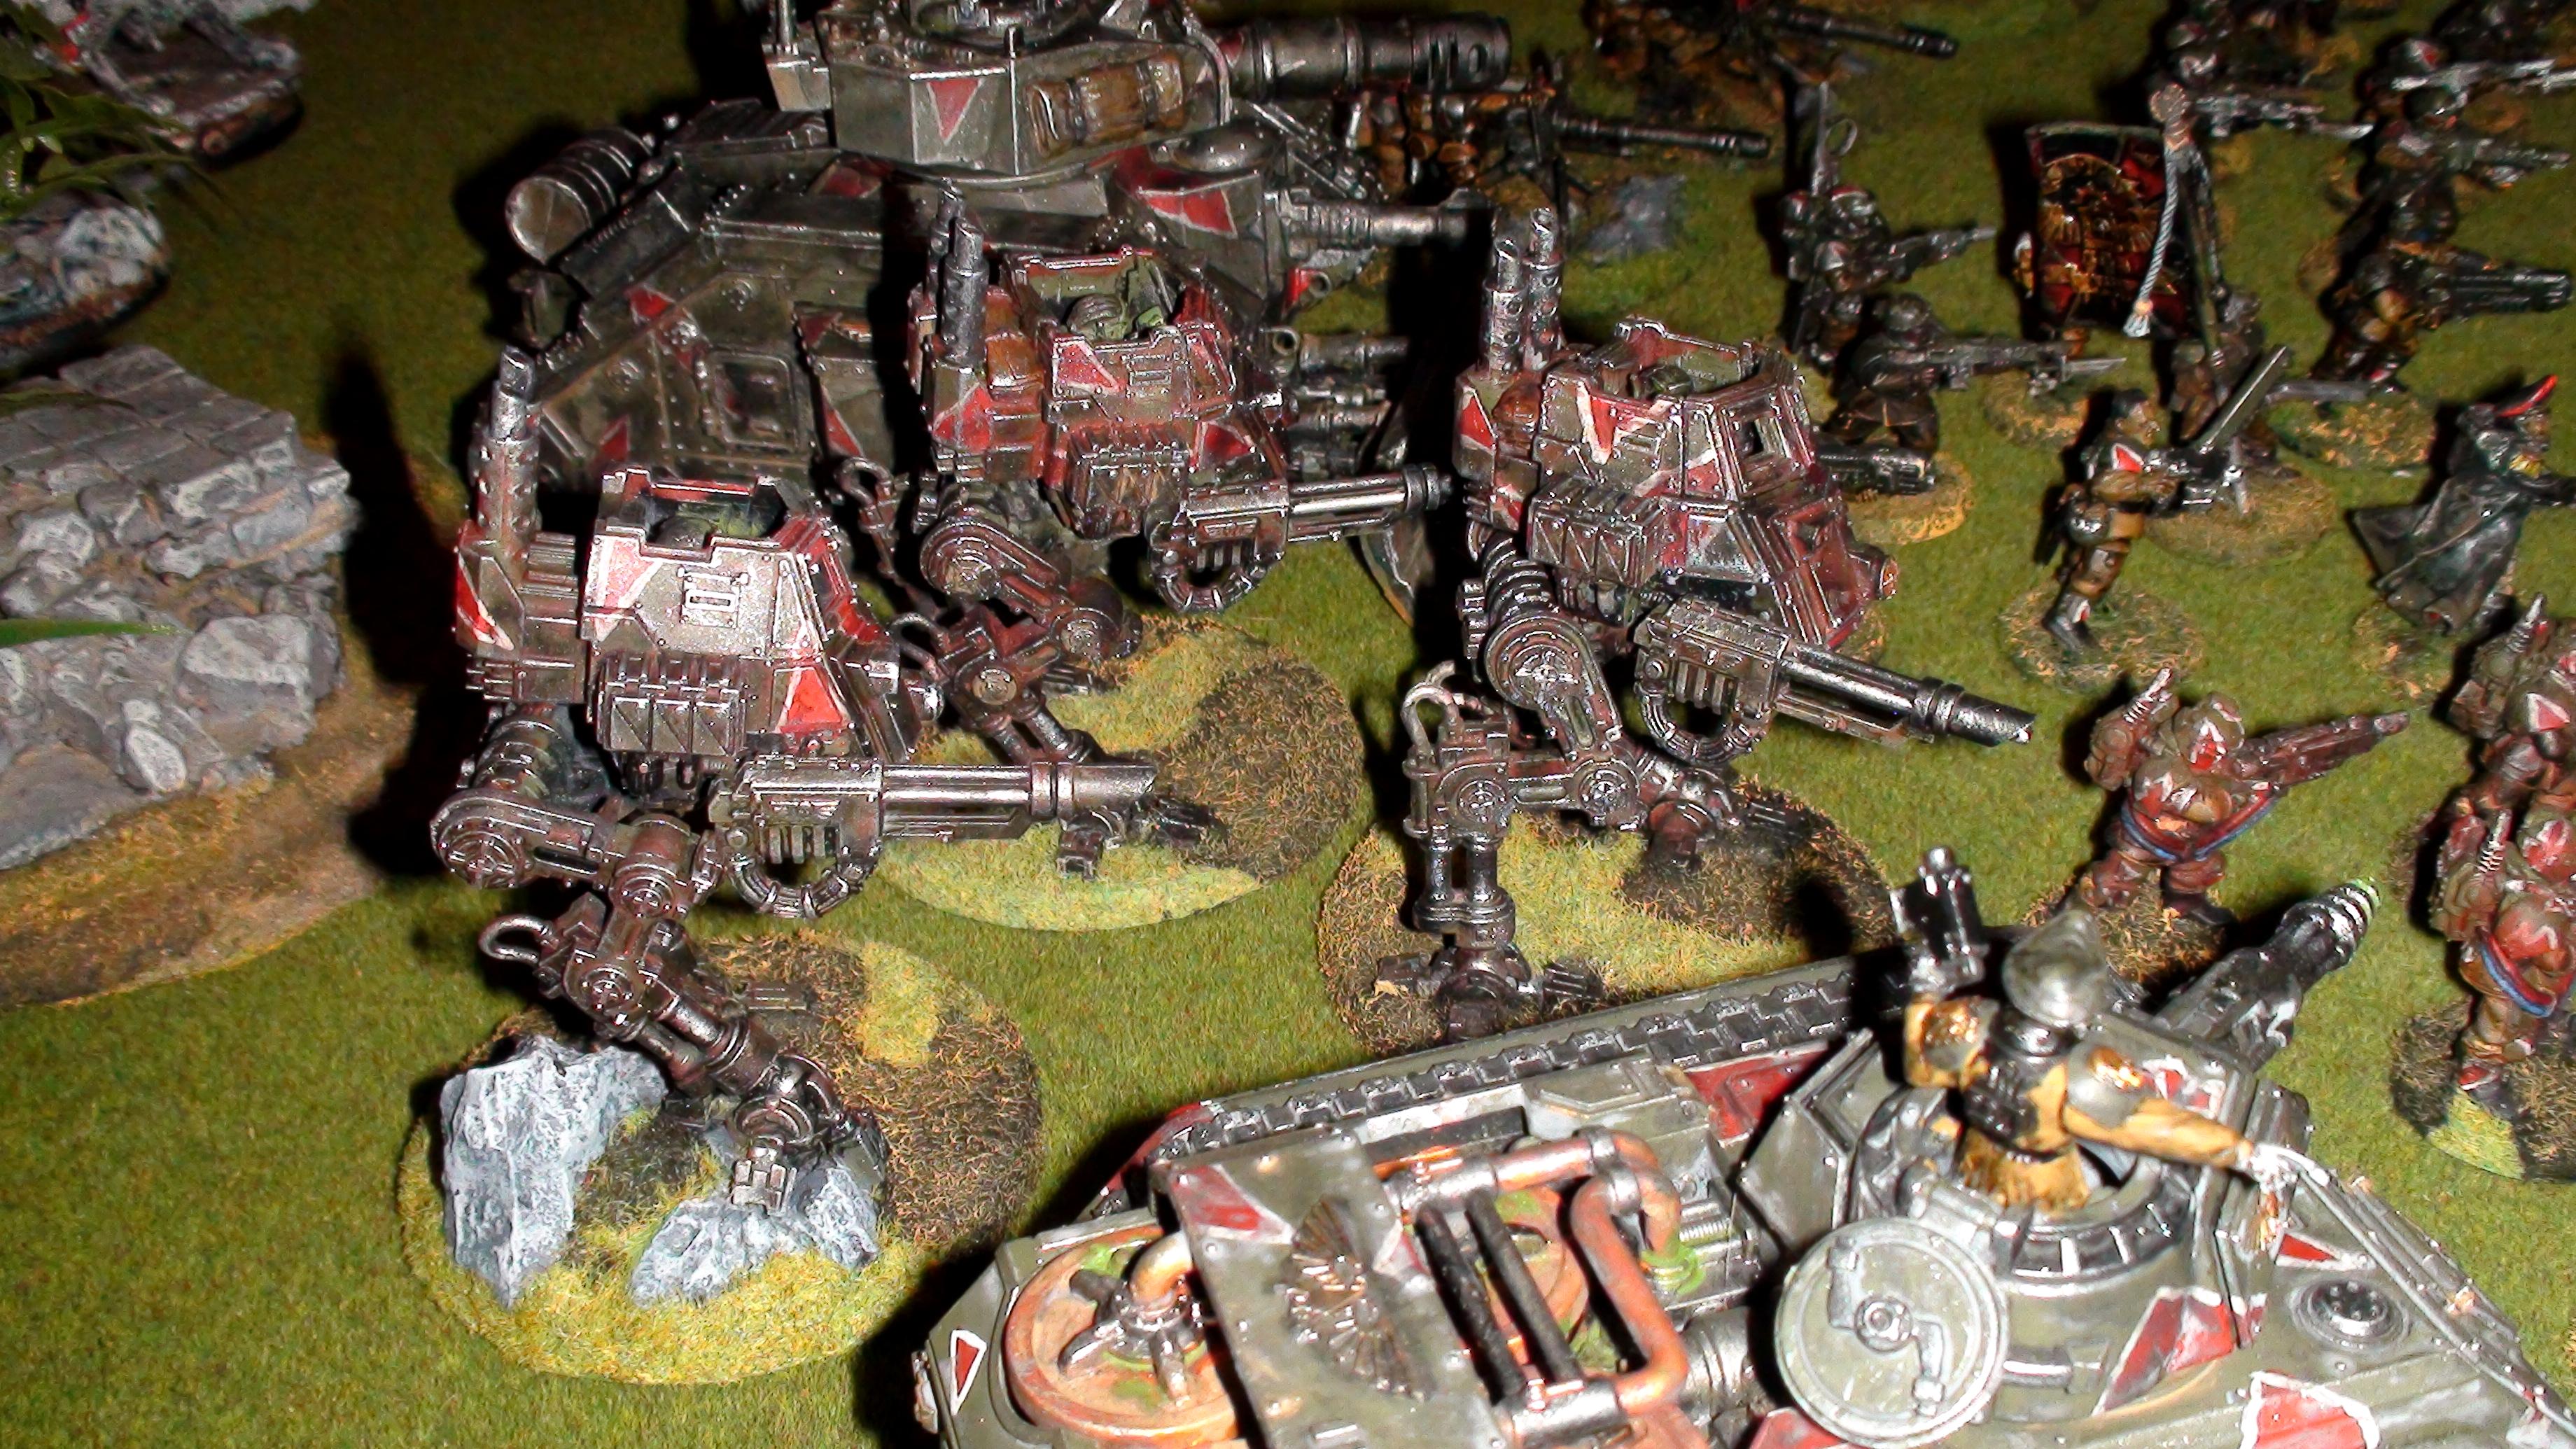 Army, Assault, Awesome, Collection, Drop Pod, Imperial Guard, Kasrkin, Land Raider, Painted, Space Marines, Space Wolves, Vindicator, Warhammer 40,000, Warhammer Fantasy